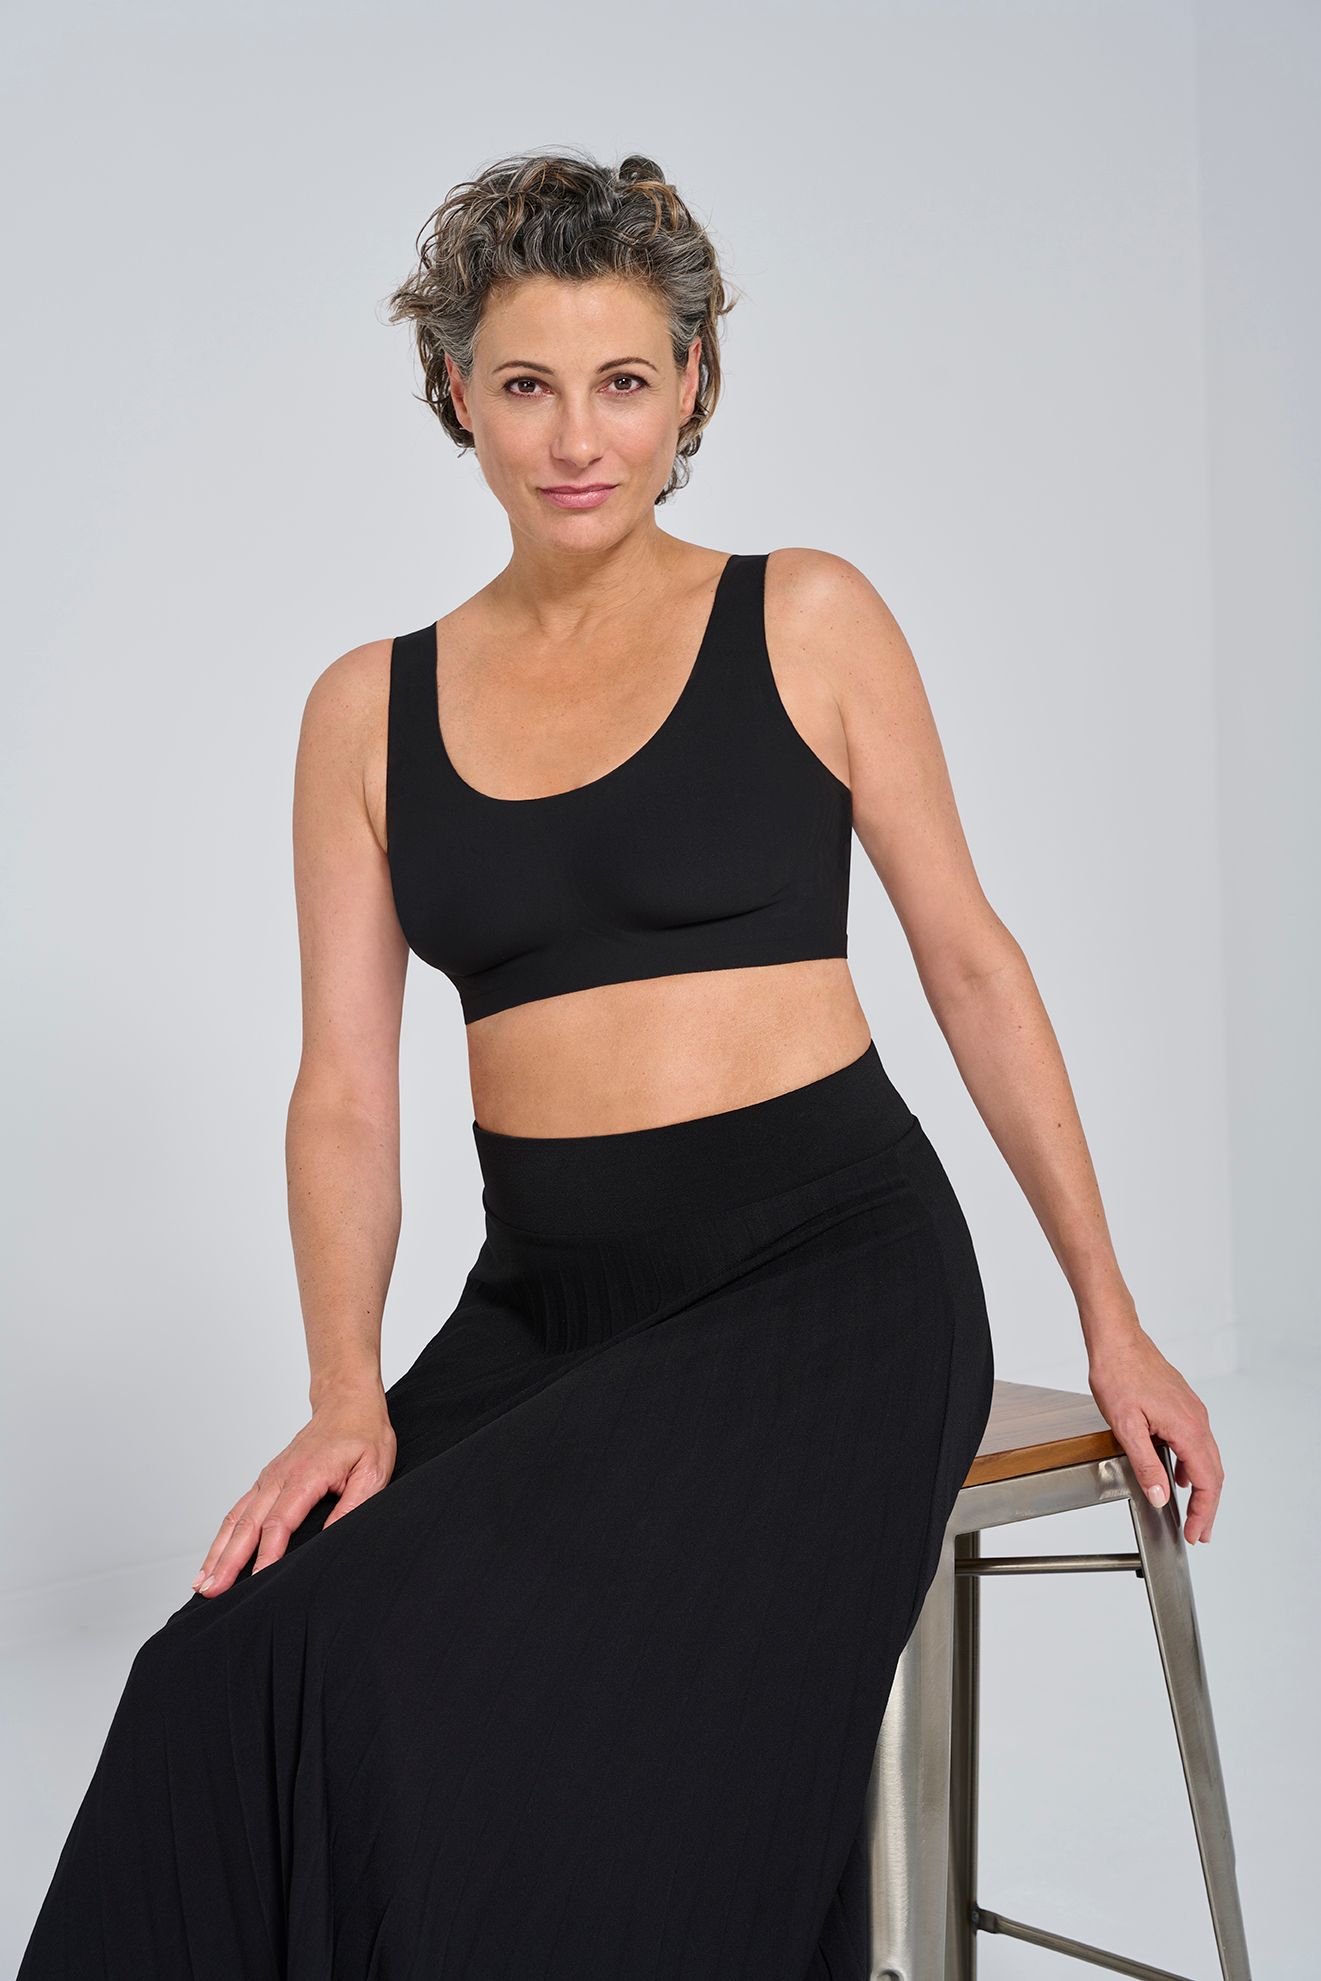 A sports bra is a specialized type of bra designed to provide support and comfort during physical activities, particularly exercise and sports. It typically features a snug fit and is made from breathable, moisture-wicking fabric to keep the wearer dry and comfortable. Sports bras often have wider straps and a racerback design to distribute pressure evenly and minimize movement of the breasts during high-impact activities. They come in various levels of support, ranging from low-impact for activities like yoga to high-impact for running and intense workouts. Sports bras help reduce breast discomfort, minimize breast movement, and provide necessary support, contributing to a more comfortable and confident workout experience.